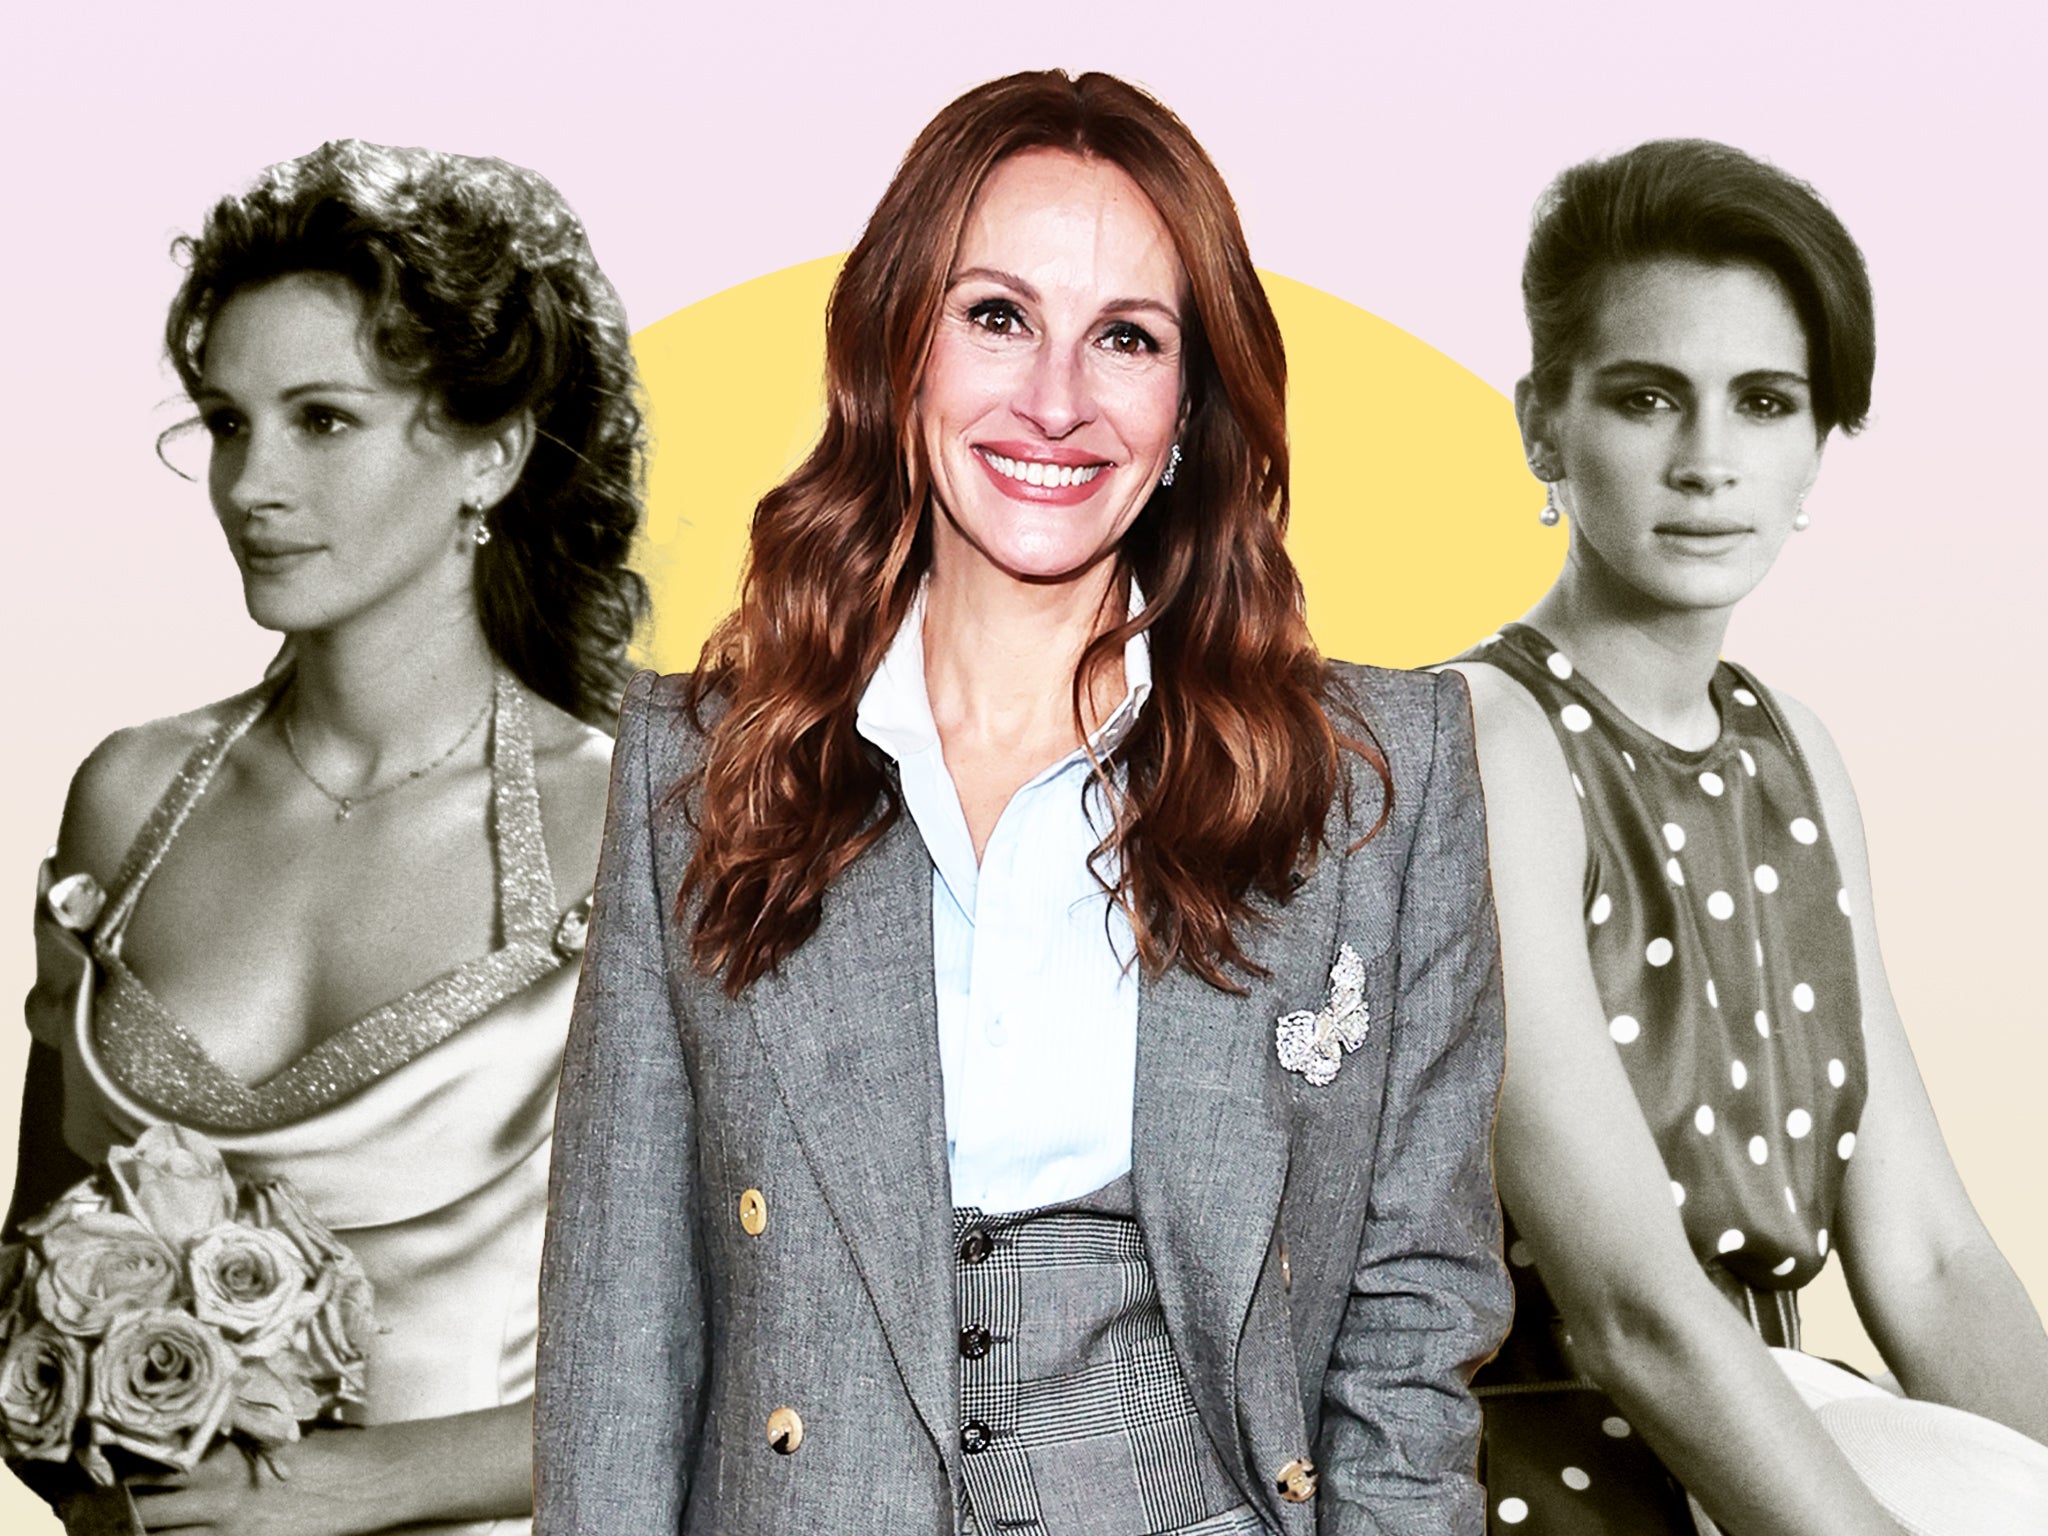 Why has Julia Roberts waited 20 years to star in another romcom